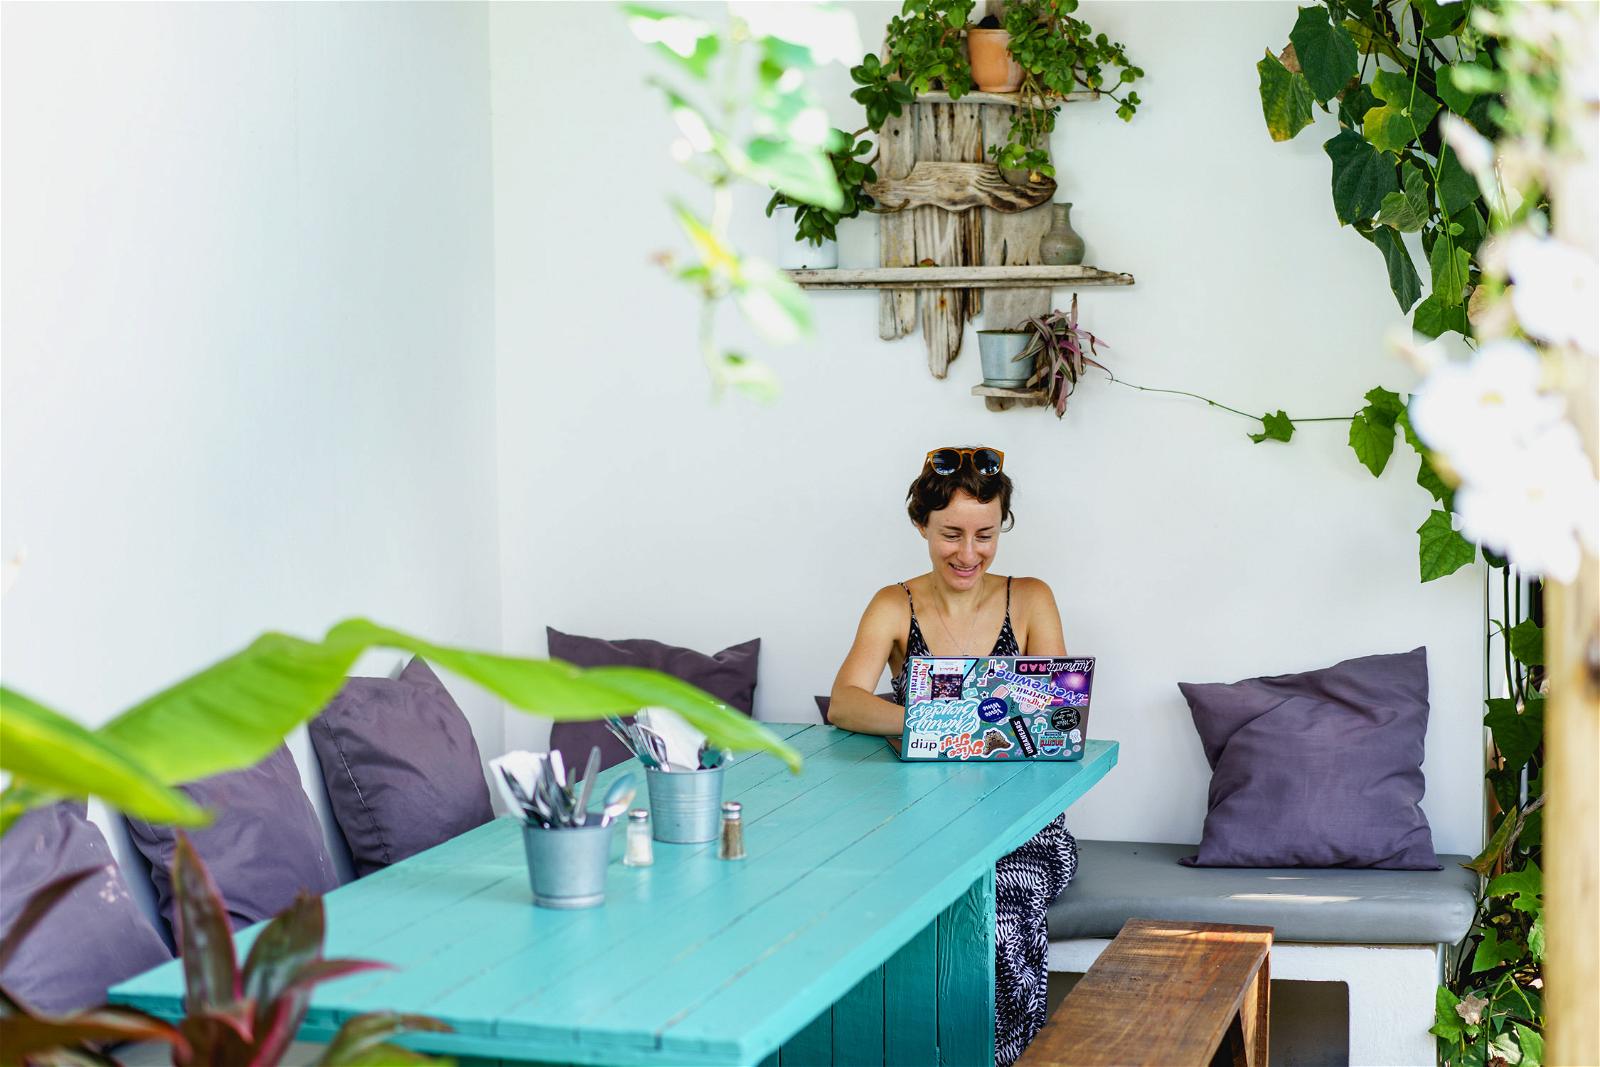 15 Ways to Network Remotely When You Work From Home